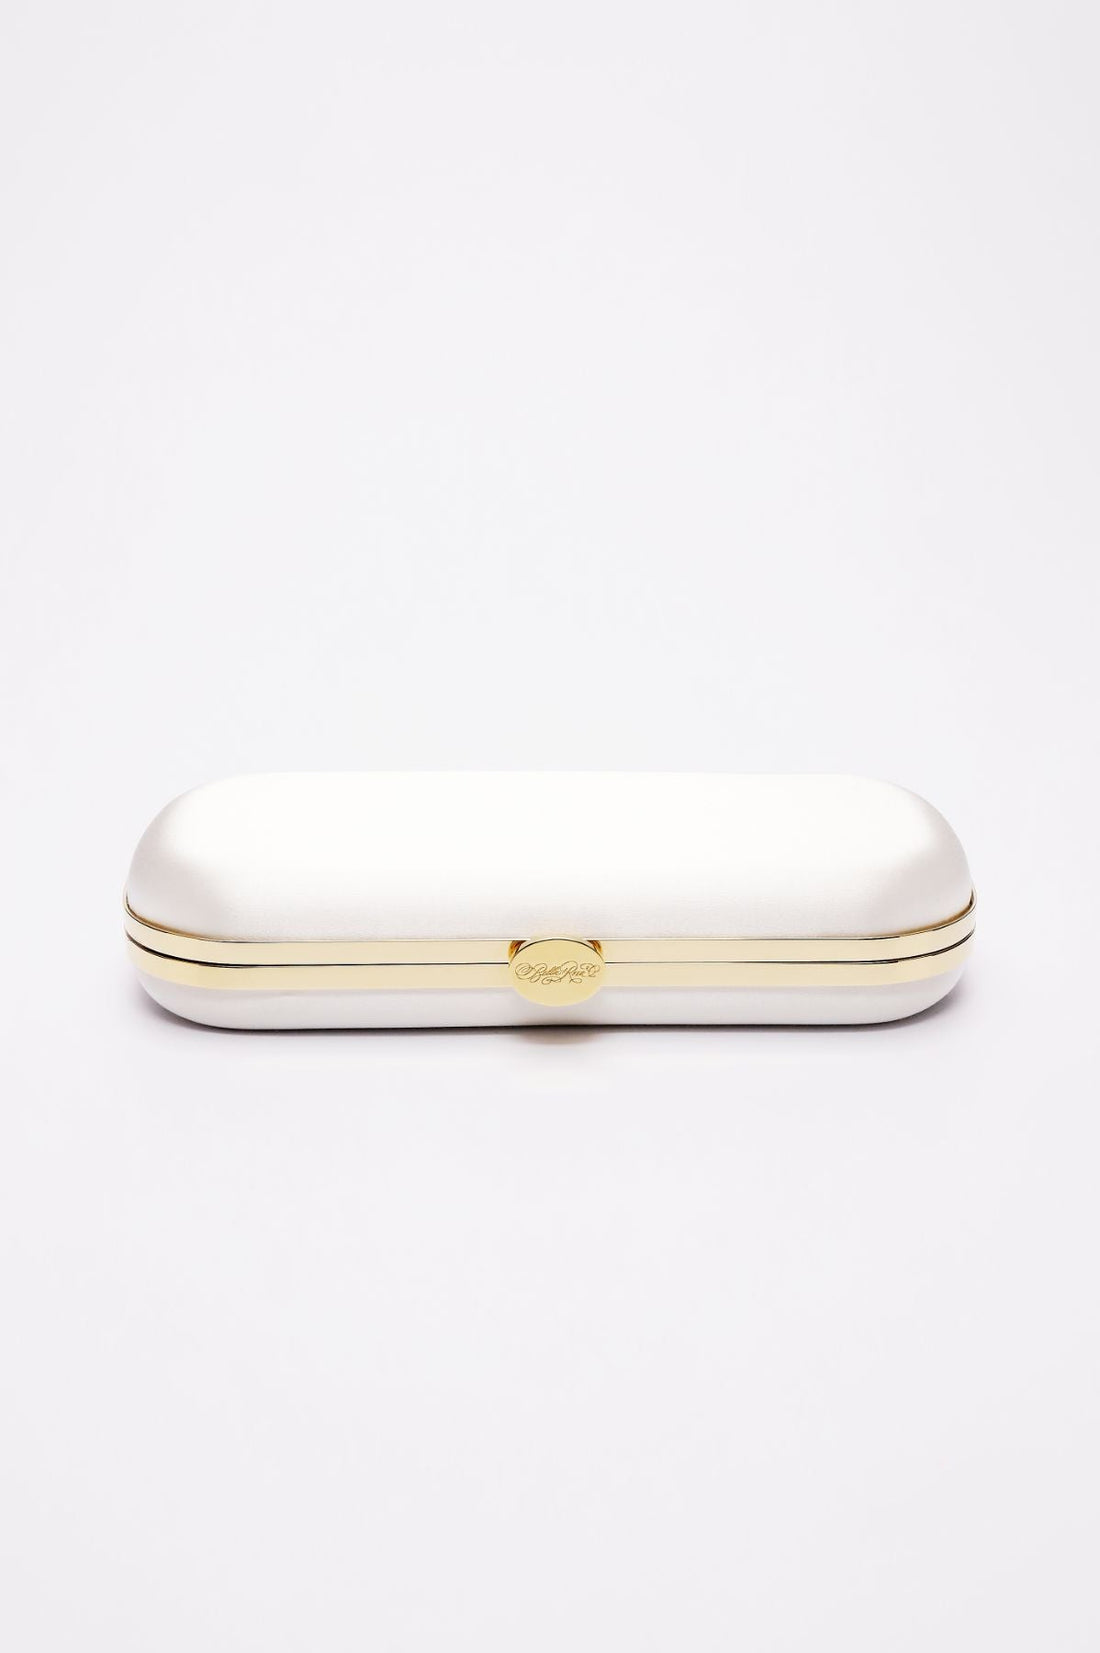 Top closed view of Bella Clutch in Ivory white satin with gold hardware frame.